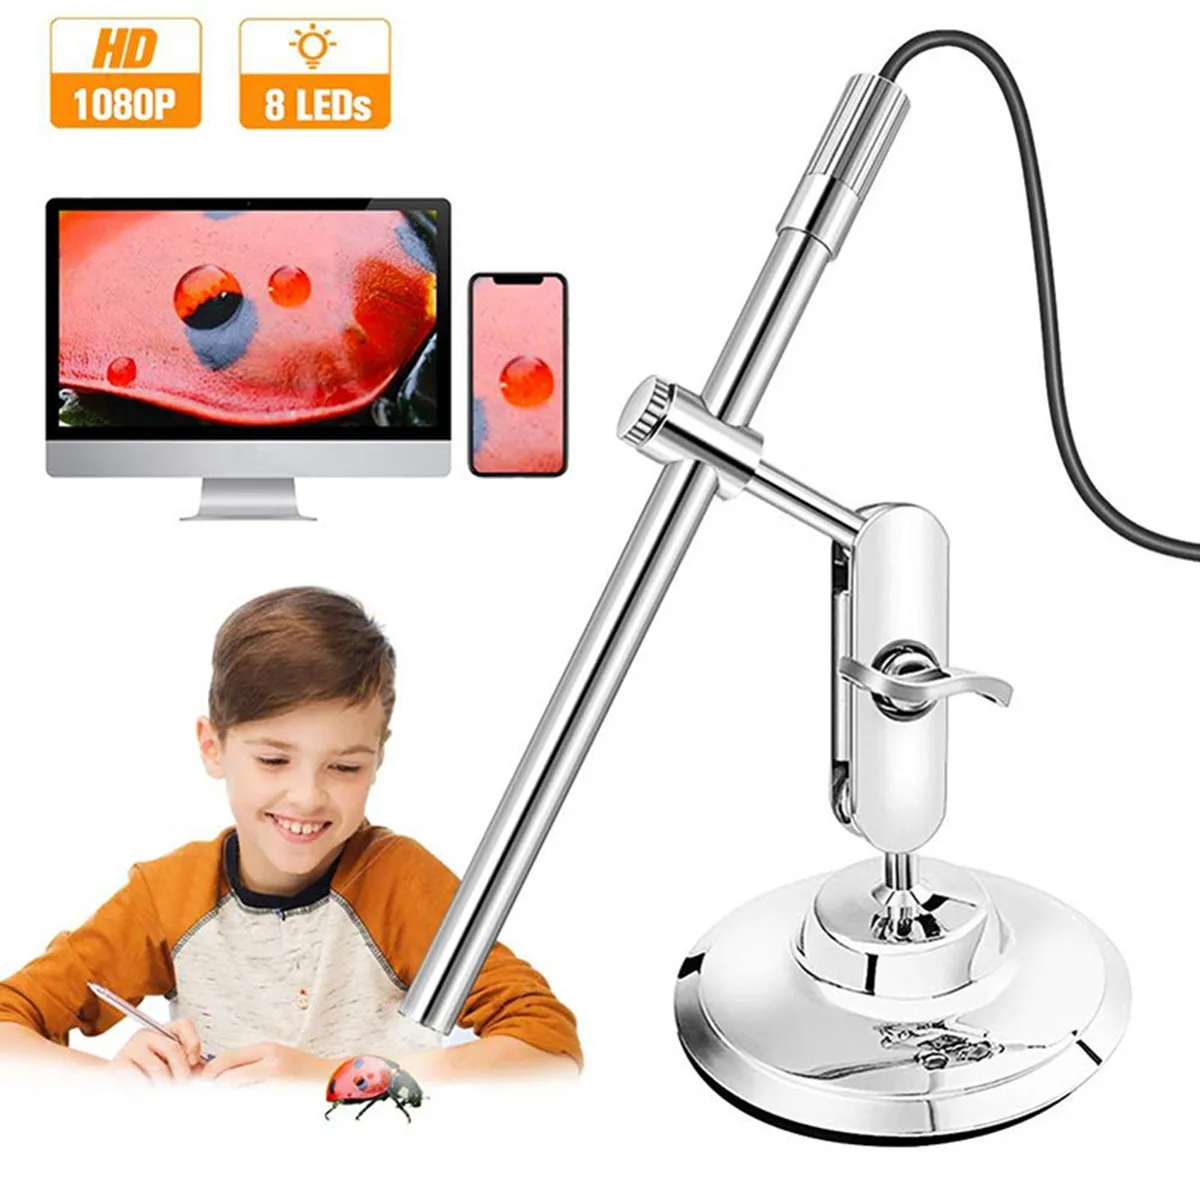 2MP 1200P 50-200x Zoom 3in1 USB Digital Microscope For Android CMOS Borescope Magnifier Handheld Endoscope Otoscope Camera 2mp 1200p 50 200x zoom 3in1 usb digital microscope for android cmos borescope magnifier handheld endoscope otoscope camera